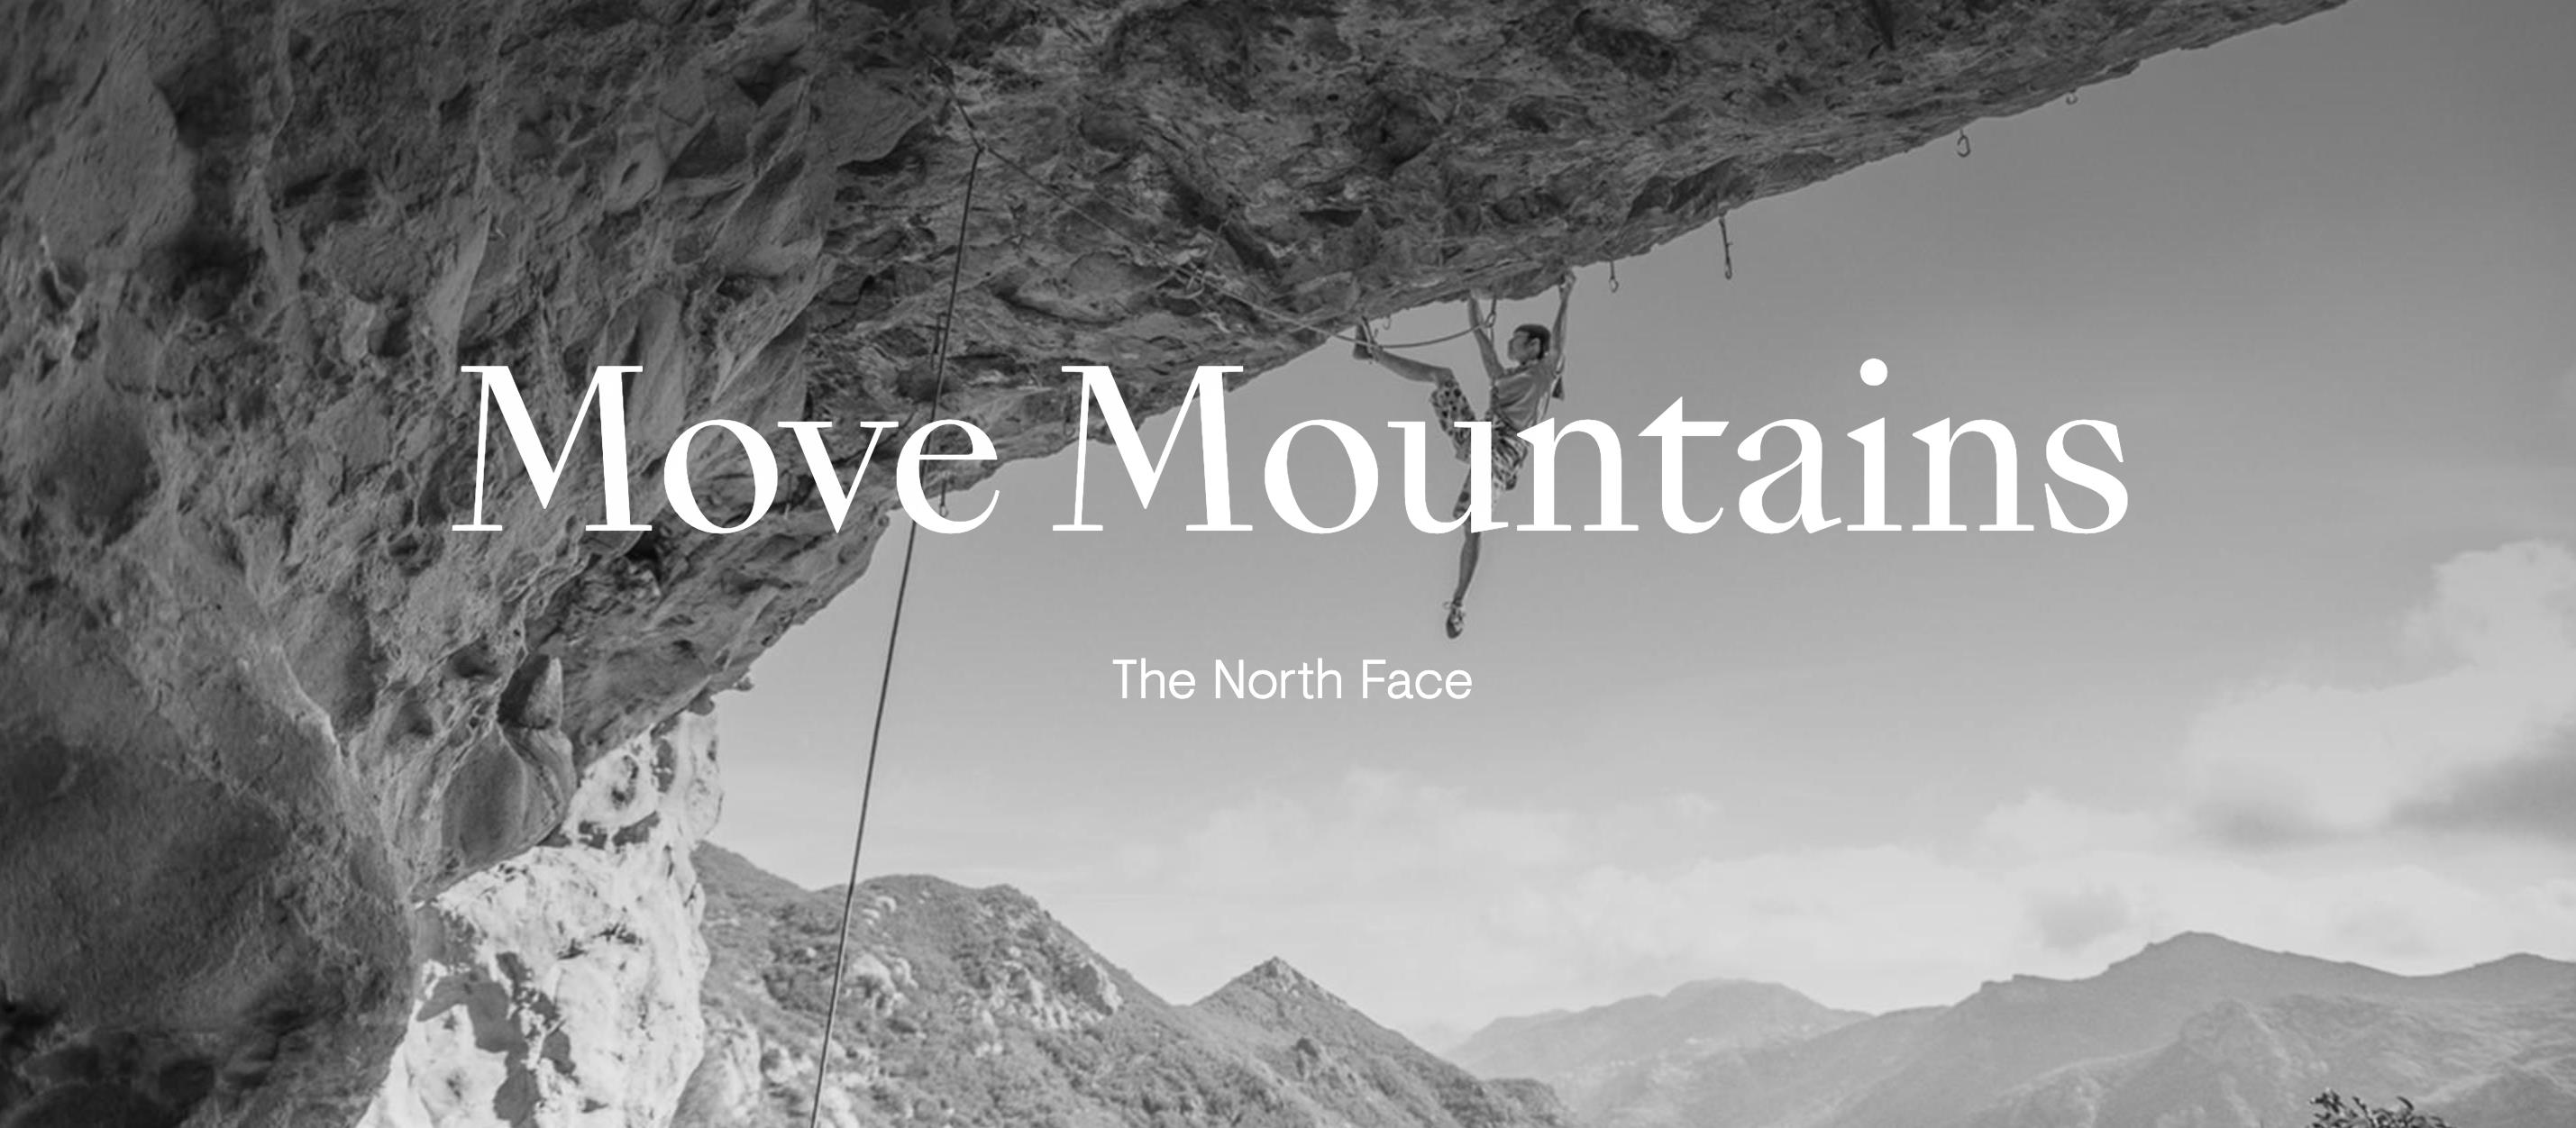 The North Face - Move Mountains Campaign